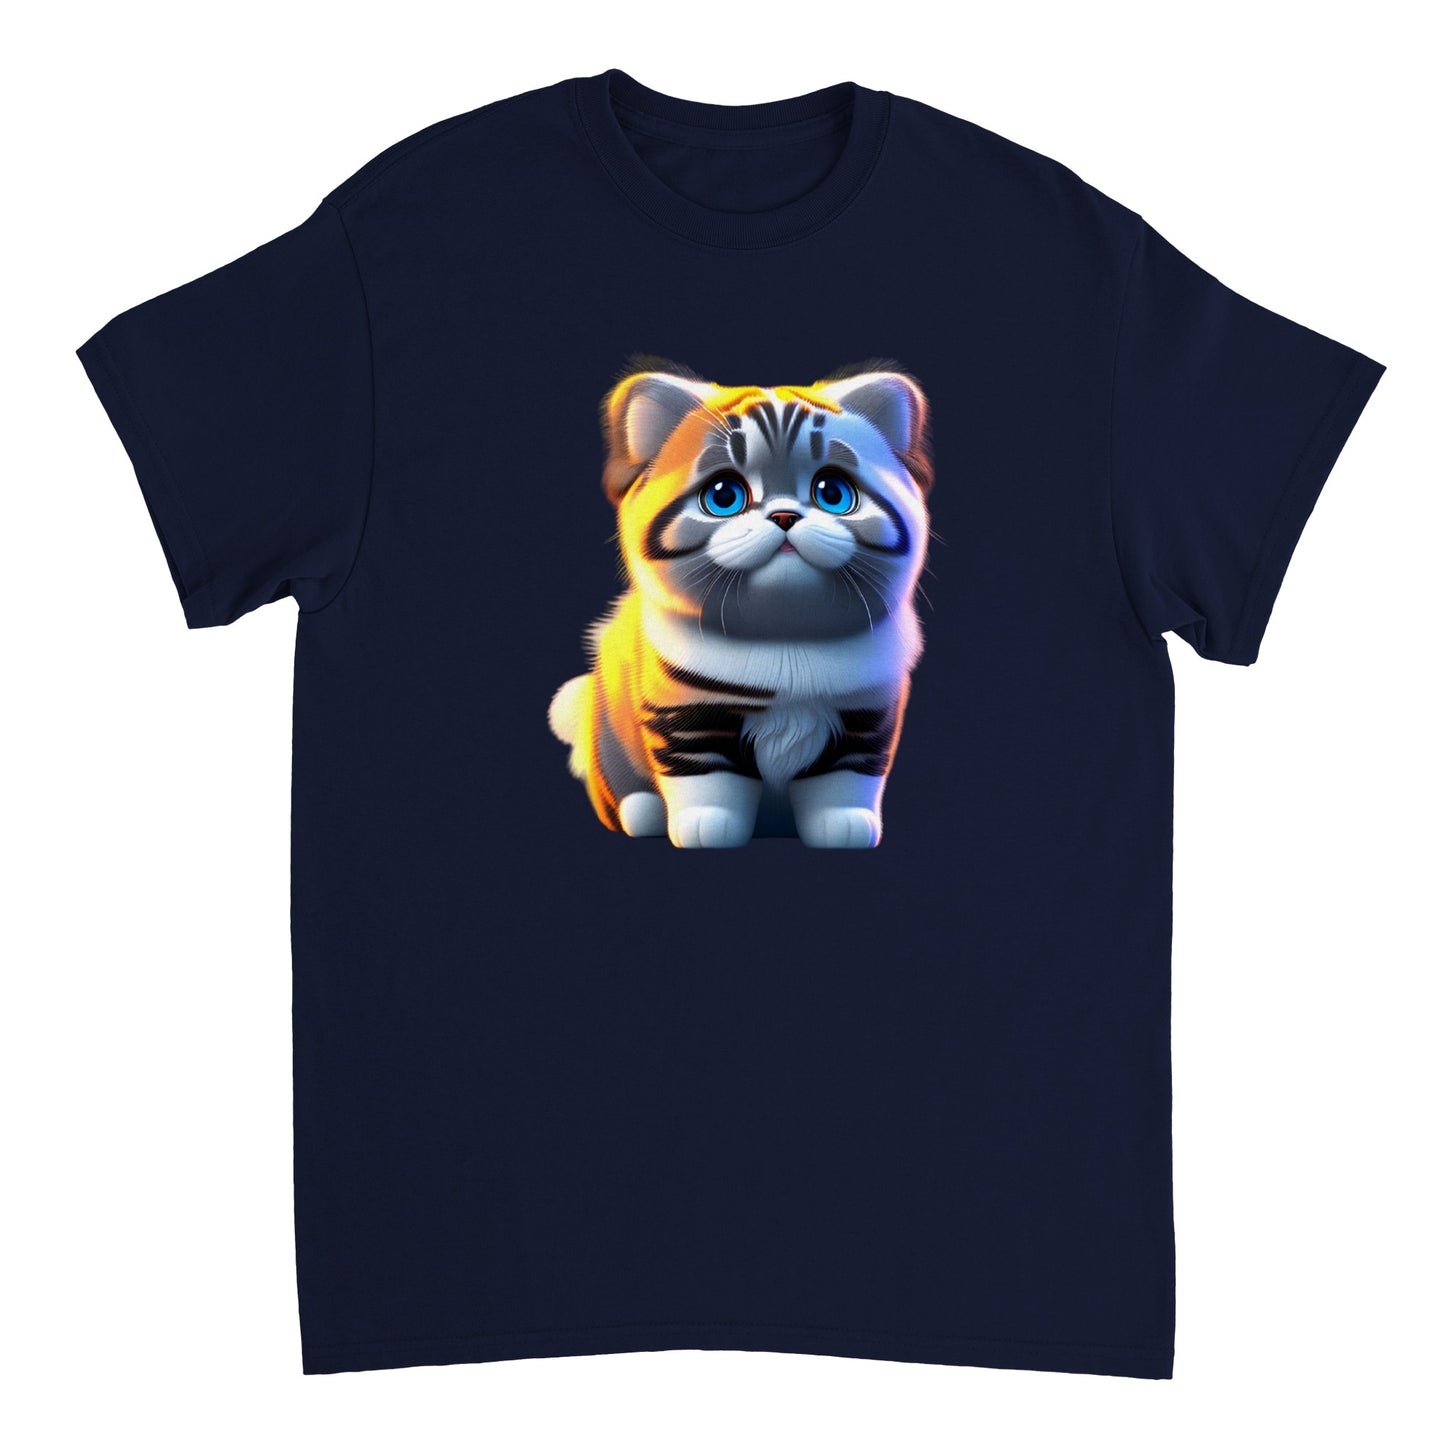 Adorable, Cool, Cute Cats and Kittens Toy - Heavyweight Unisex Crewneck T-shirt 44